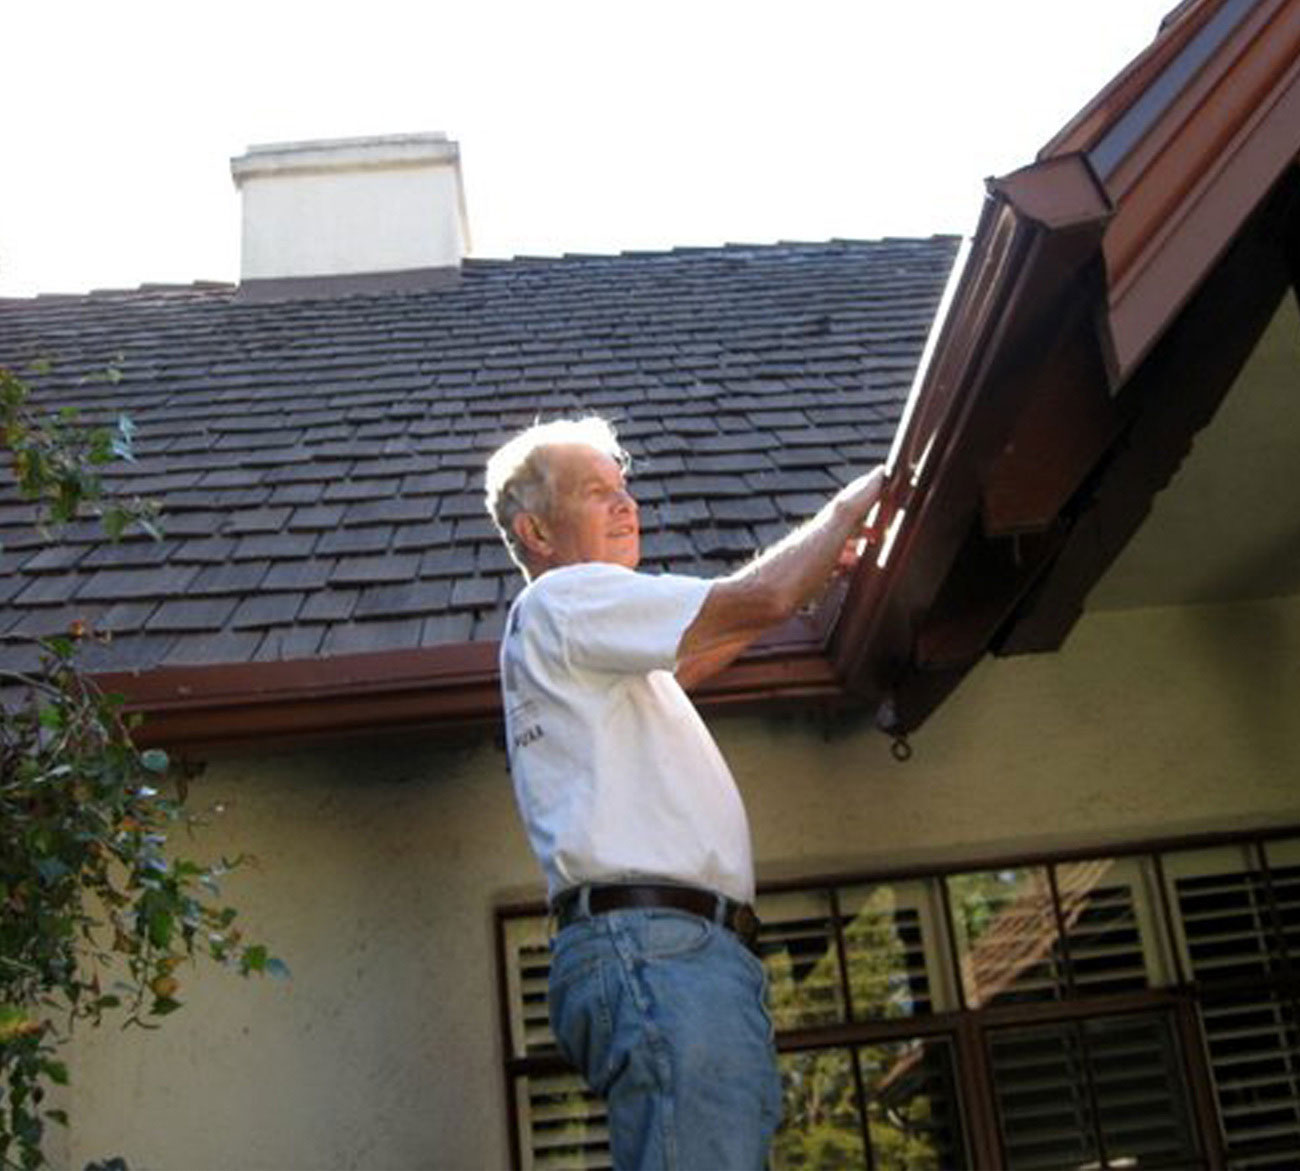 Man doing gutter maintenance, standing on ladder in front of house